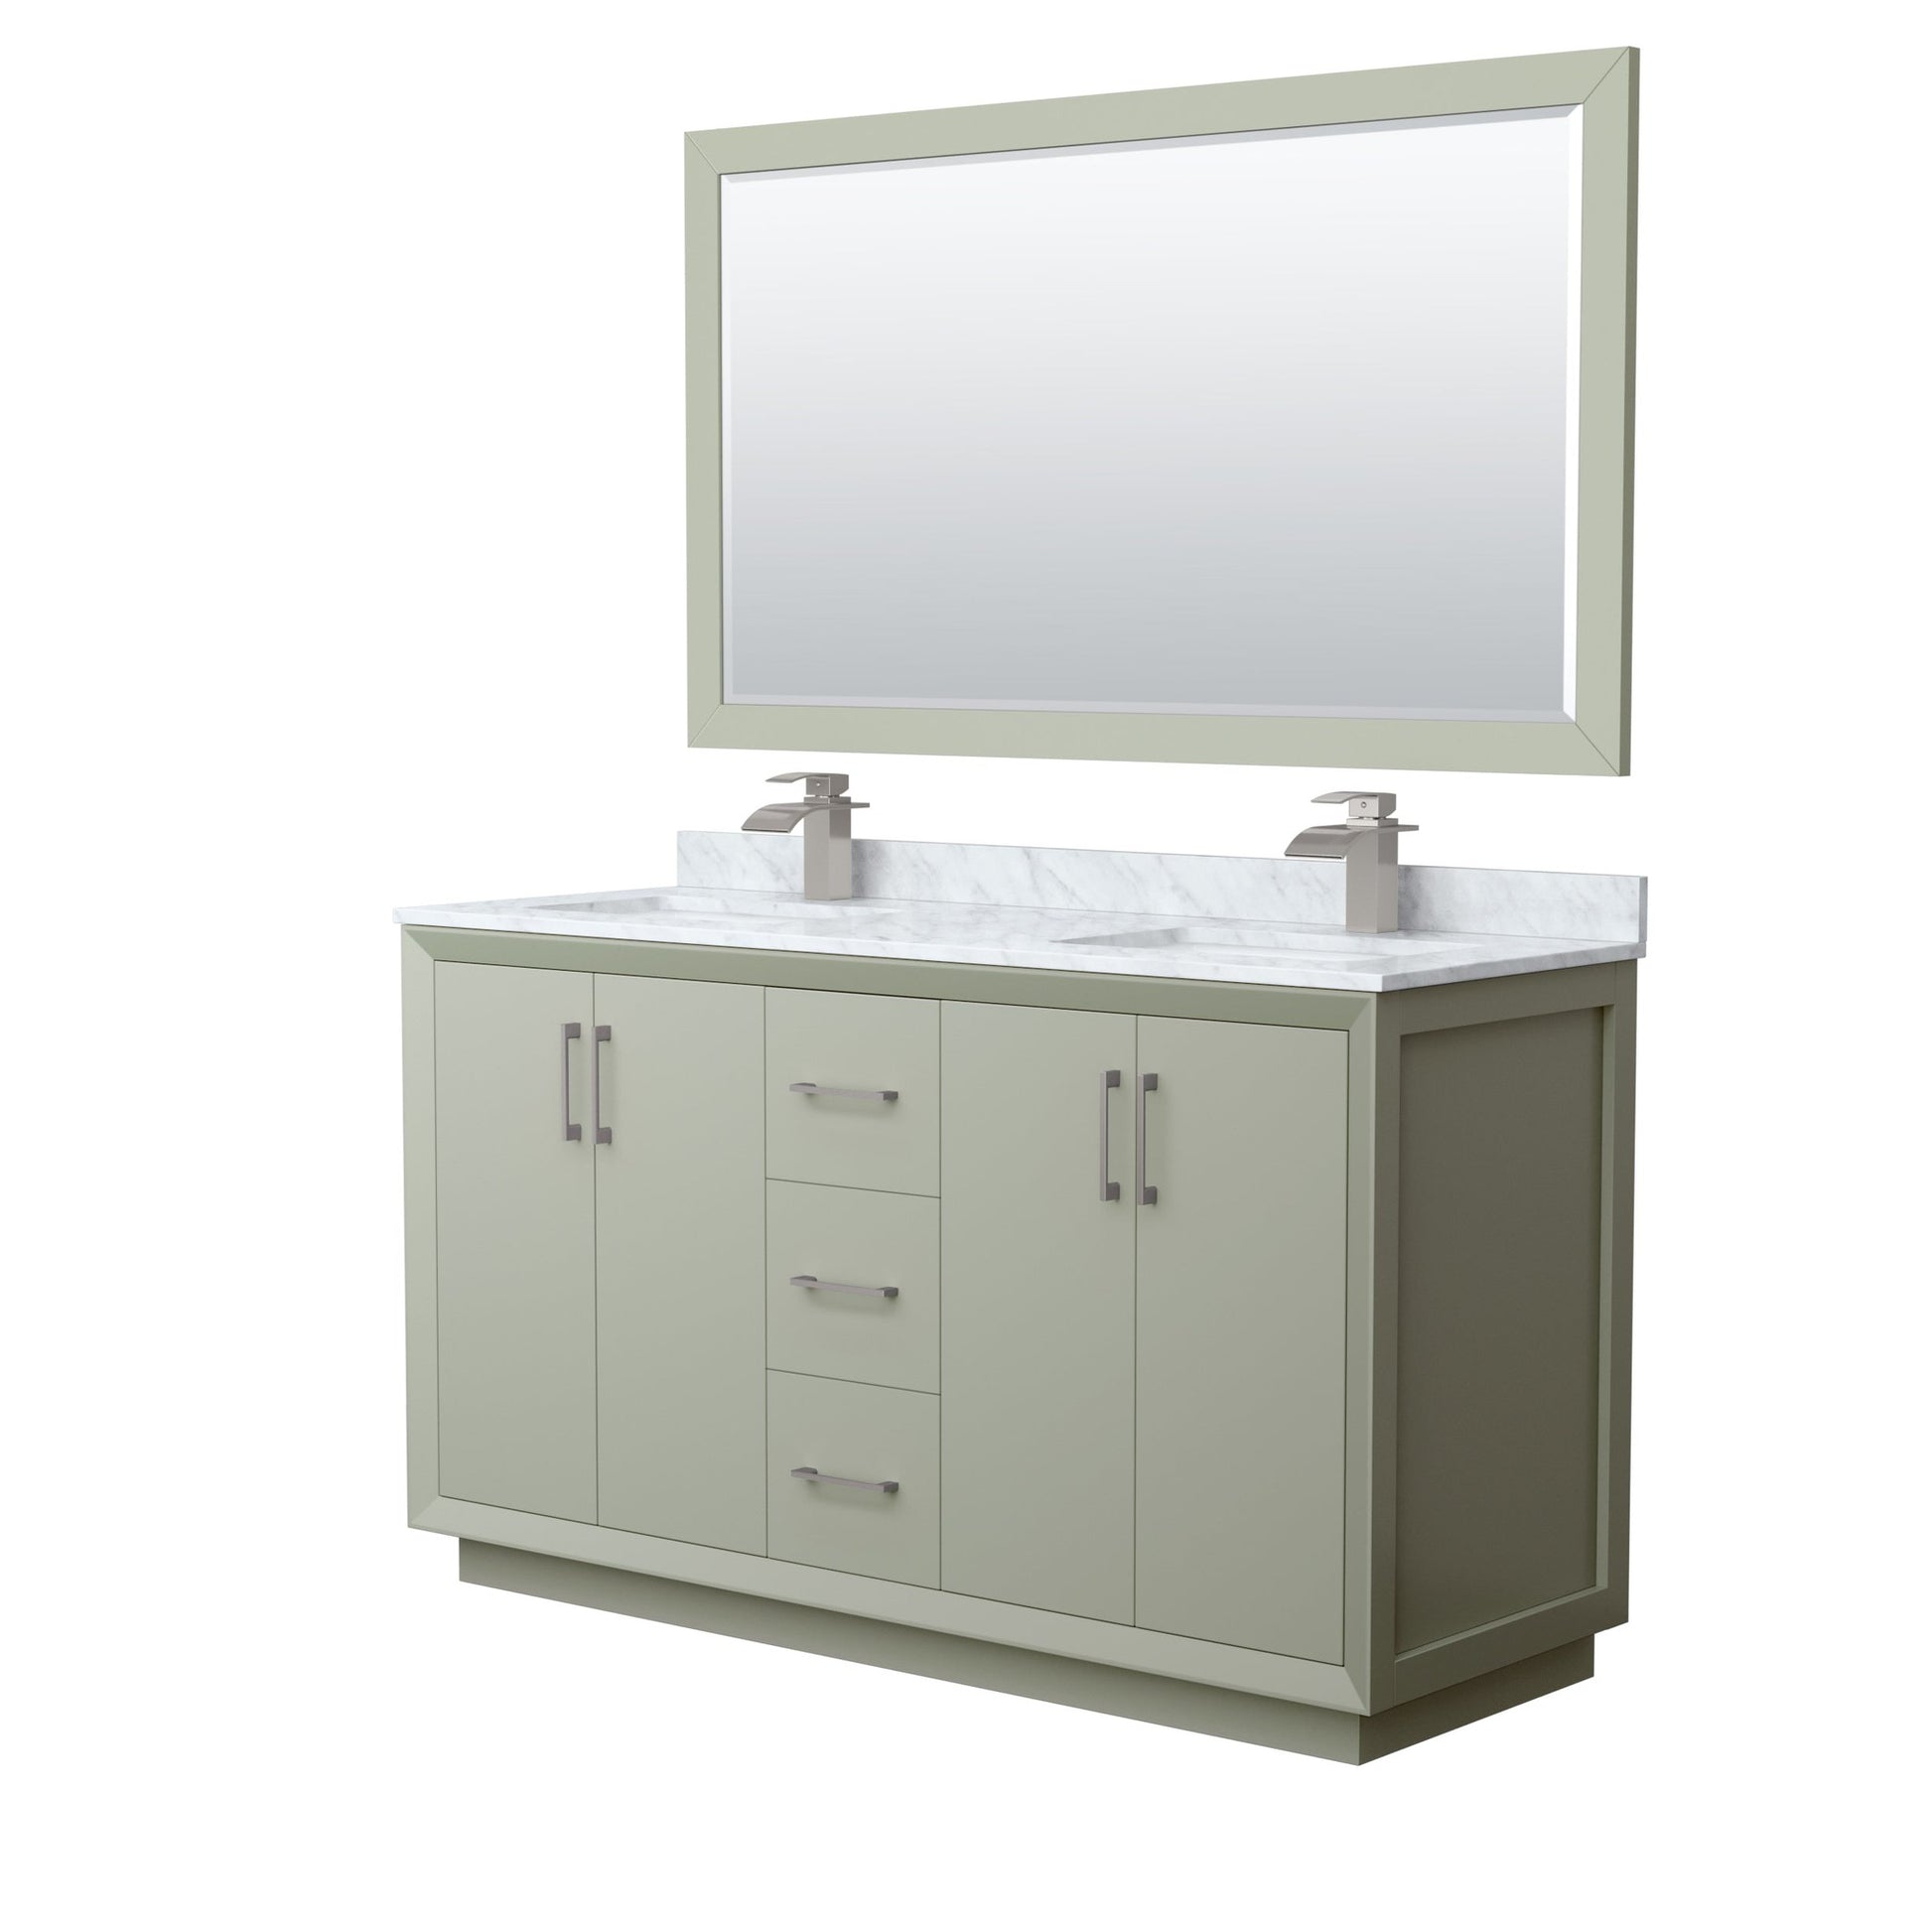 Wyndham Collection Strada 60" Double Bathroom Vanity in Light Green, White Carrara Marble Countertop, Undermount Square Sinks, Brushed Nickel Trim, 58" Mirror